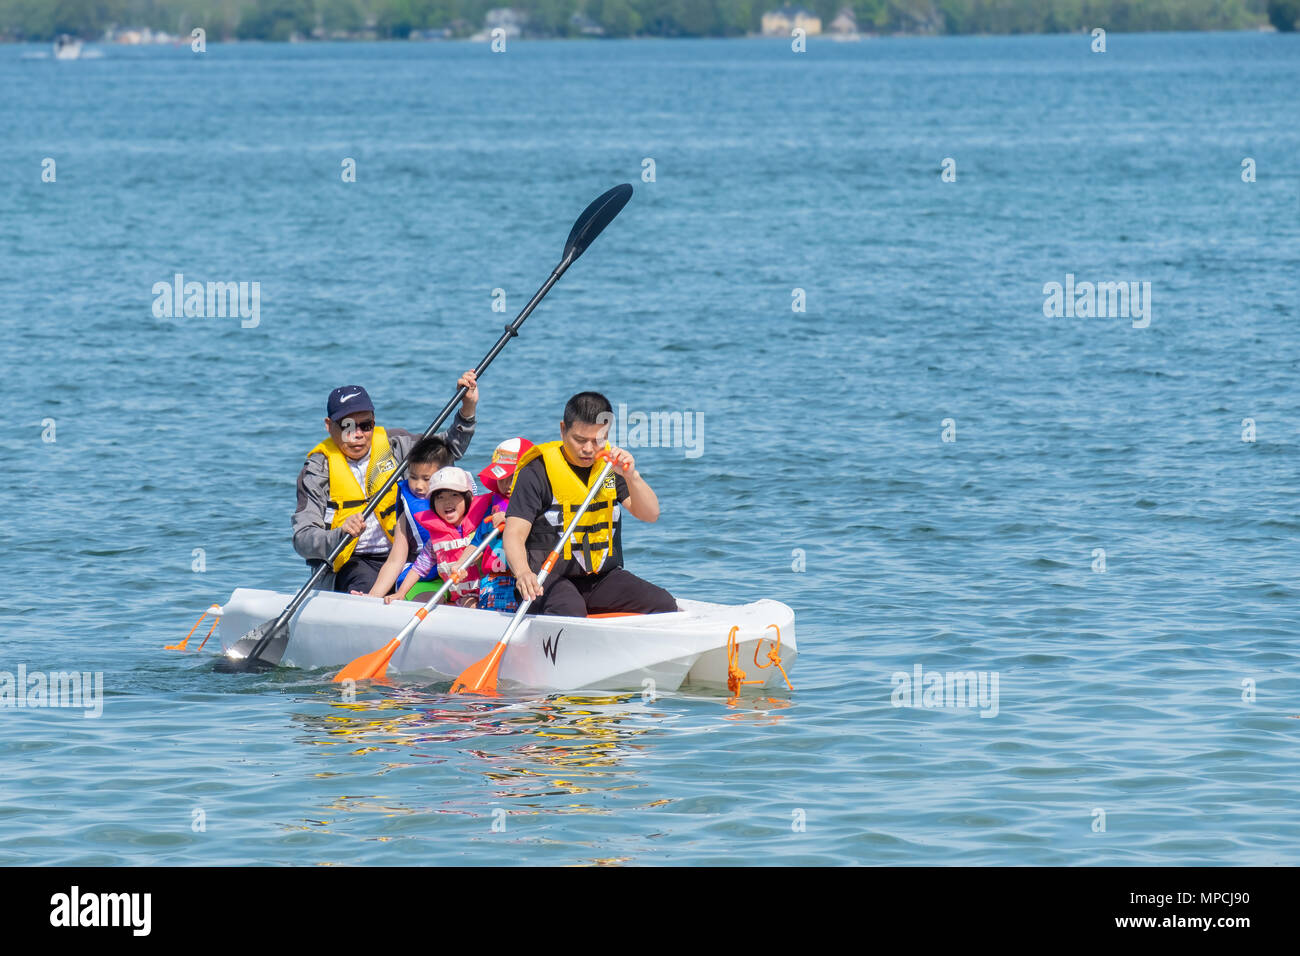 A family unit spanning 3 generations enjoy the lake on a beautiful Victoria Day long weekend. Stock Photo